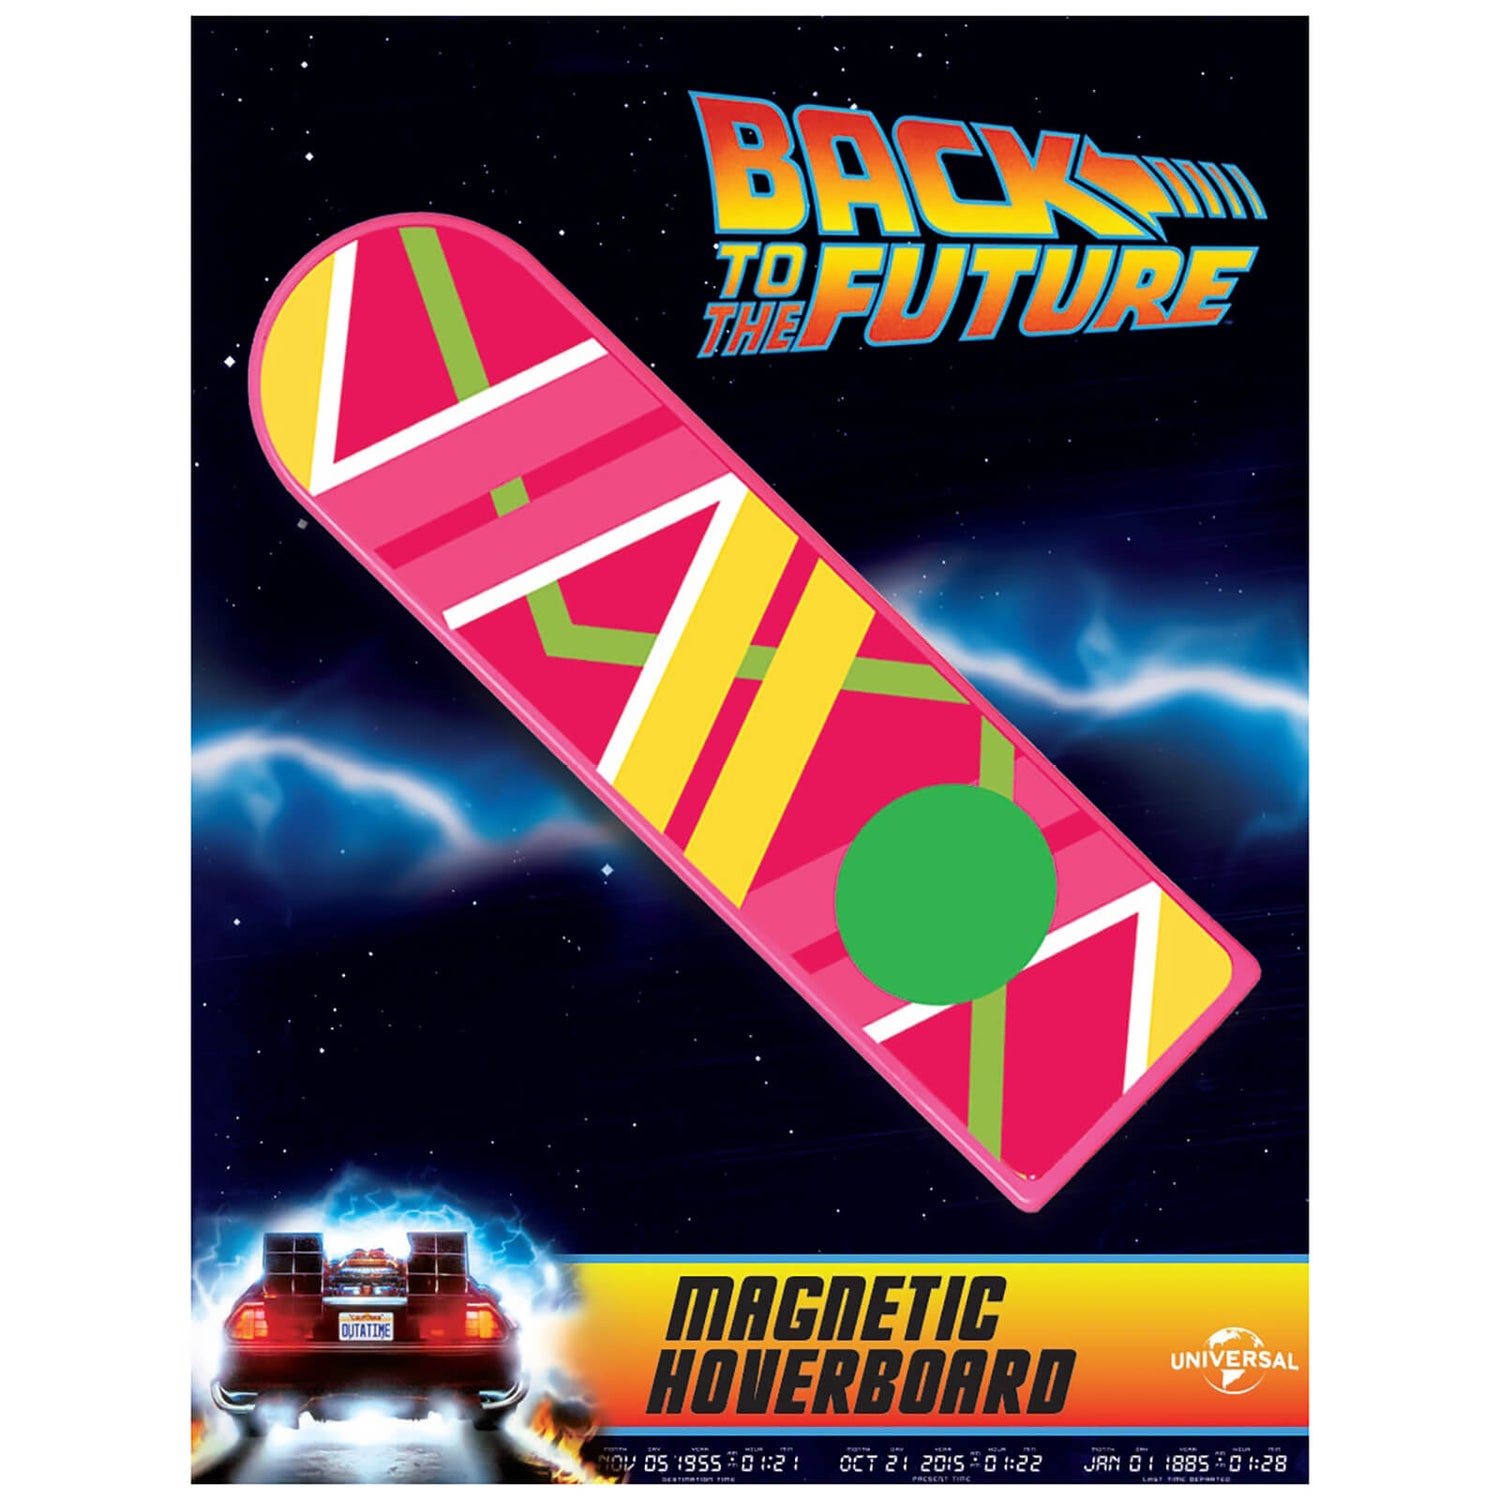 Back to the Future: Hoverboard magnétique Gifts